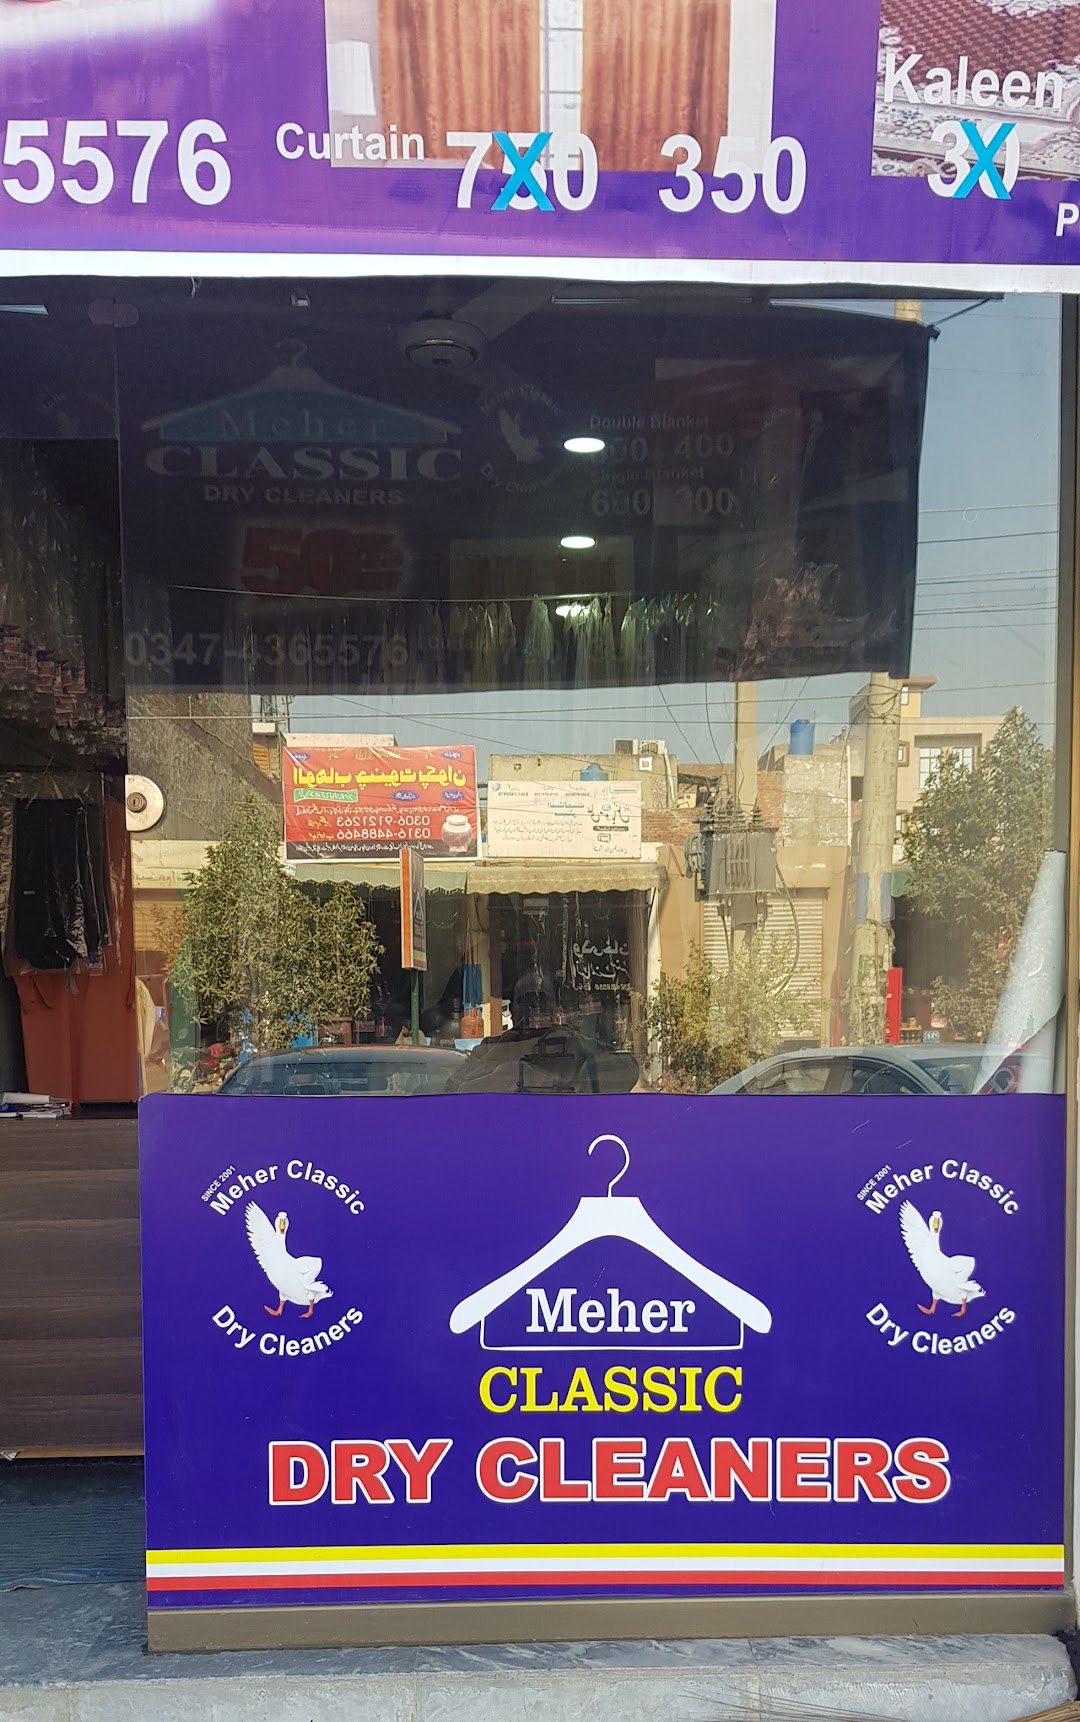 Meher Classic Dry Cleaners